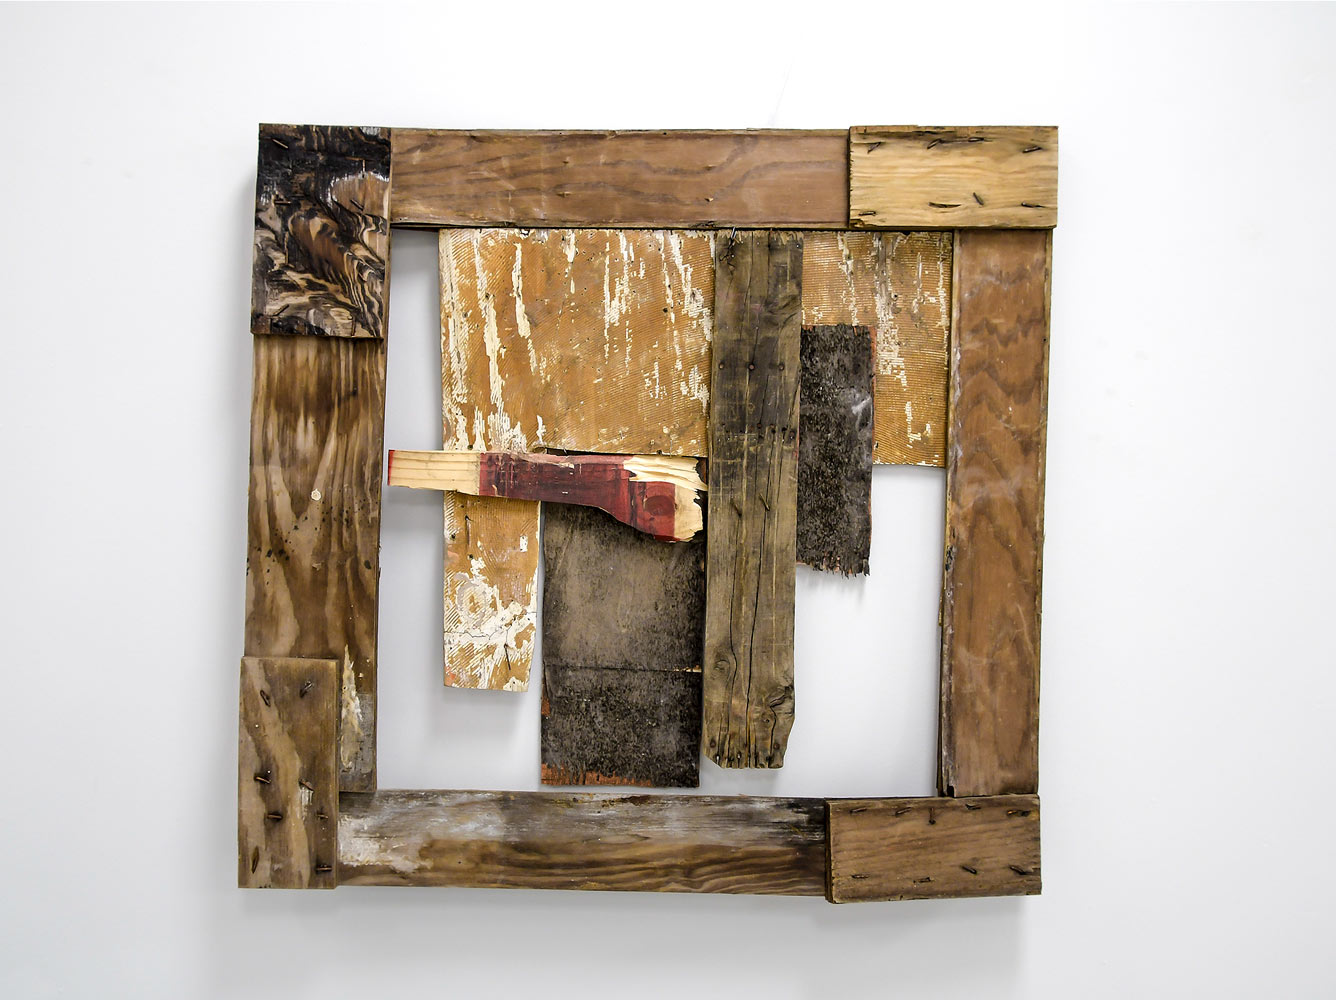  Pedazo  3, 2018 - Wood Collage - 45.5 x 47 in